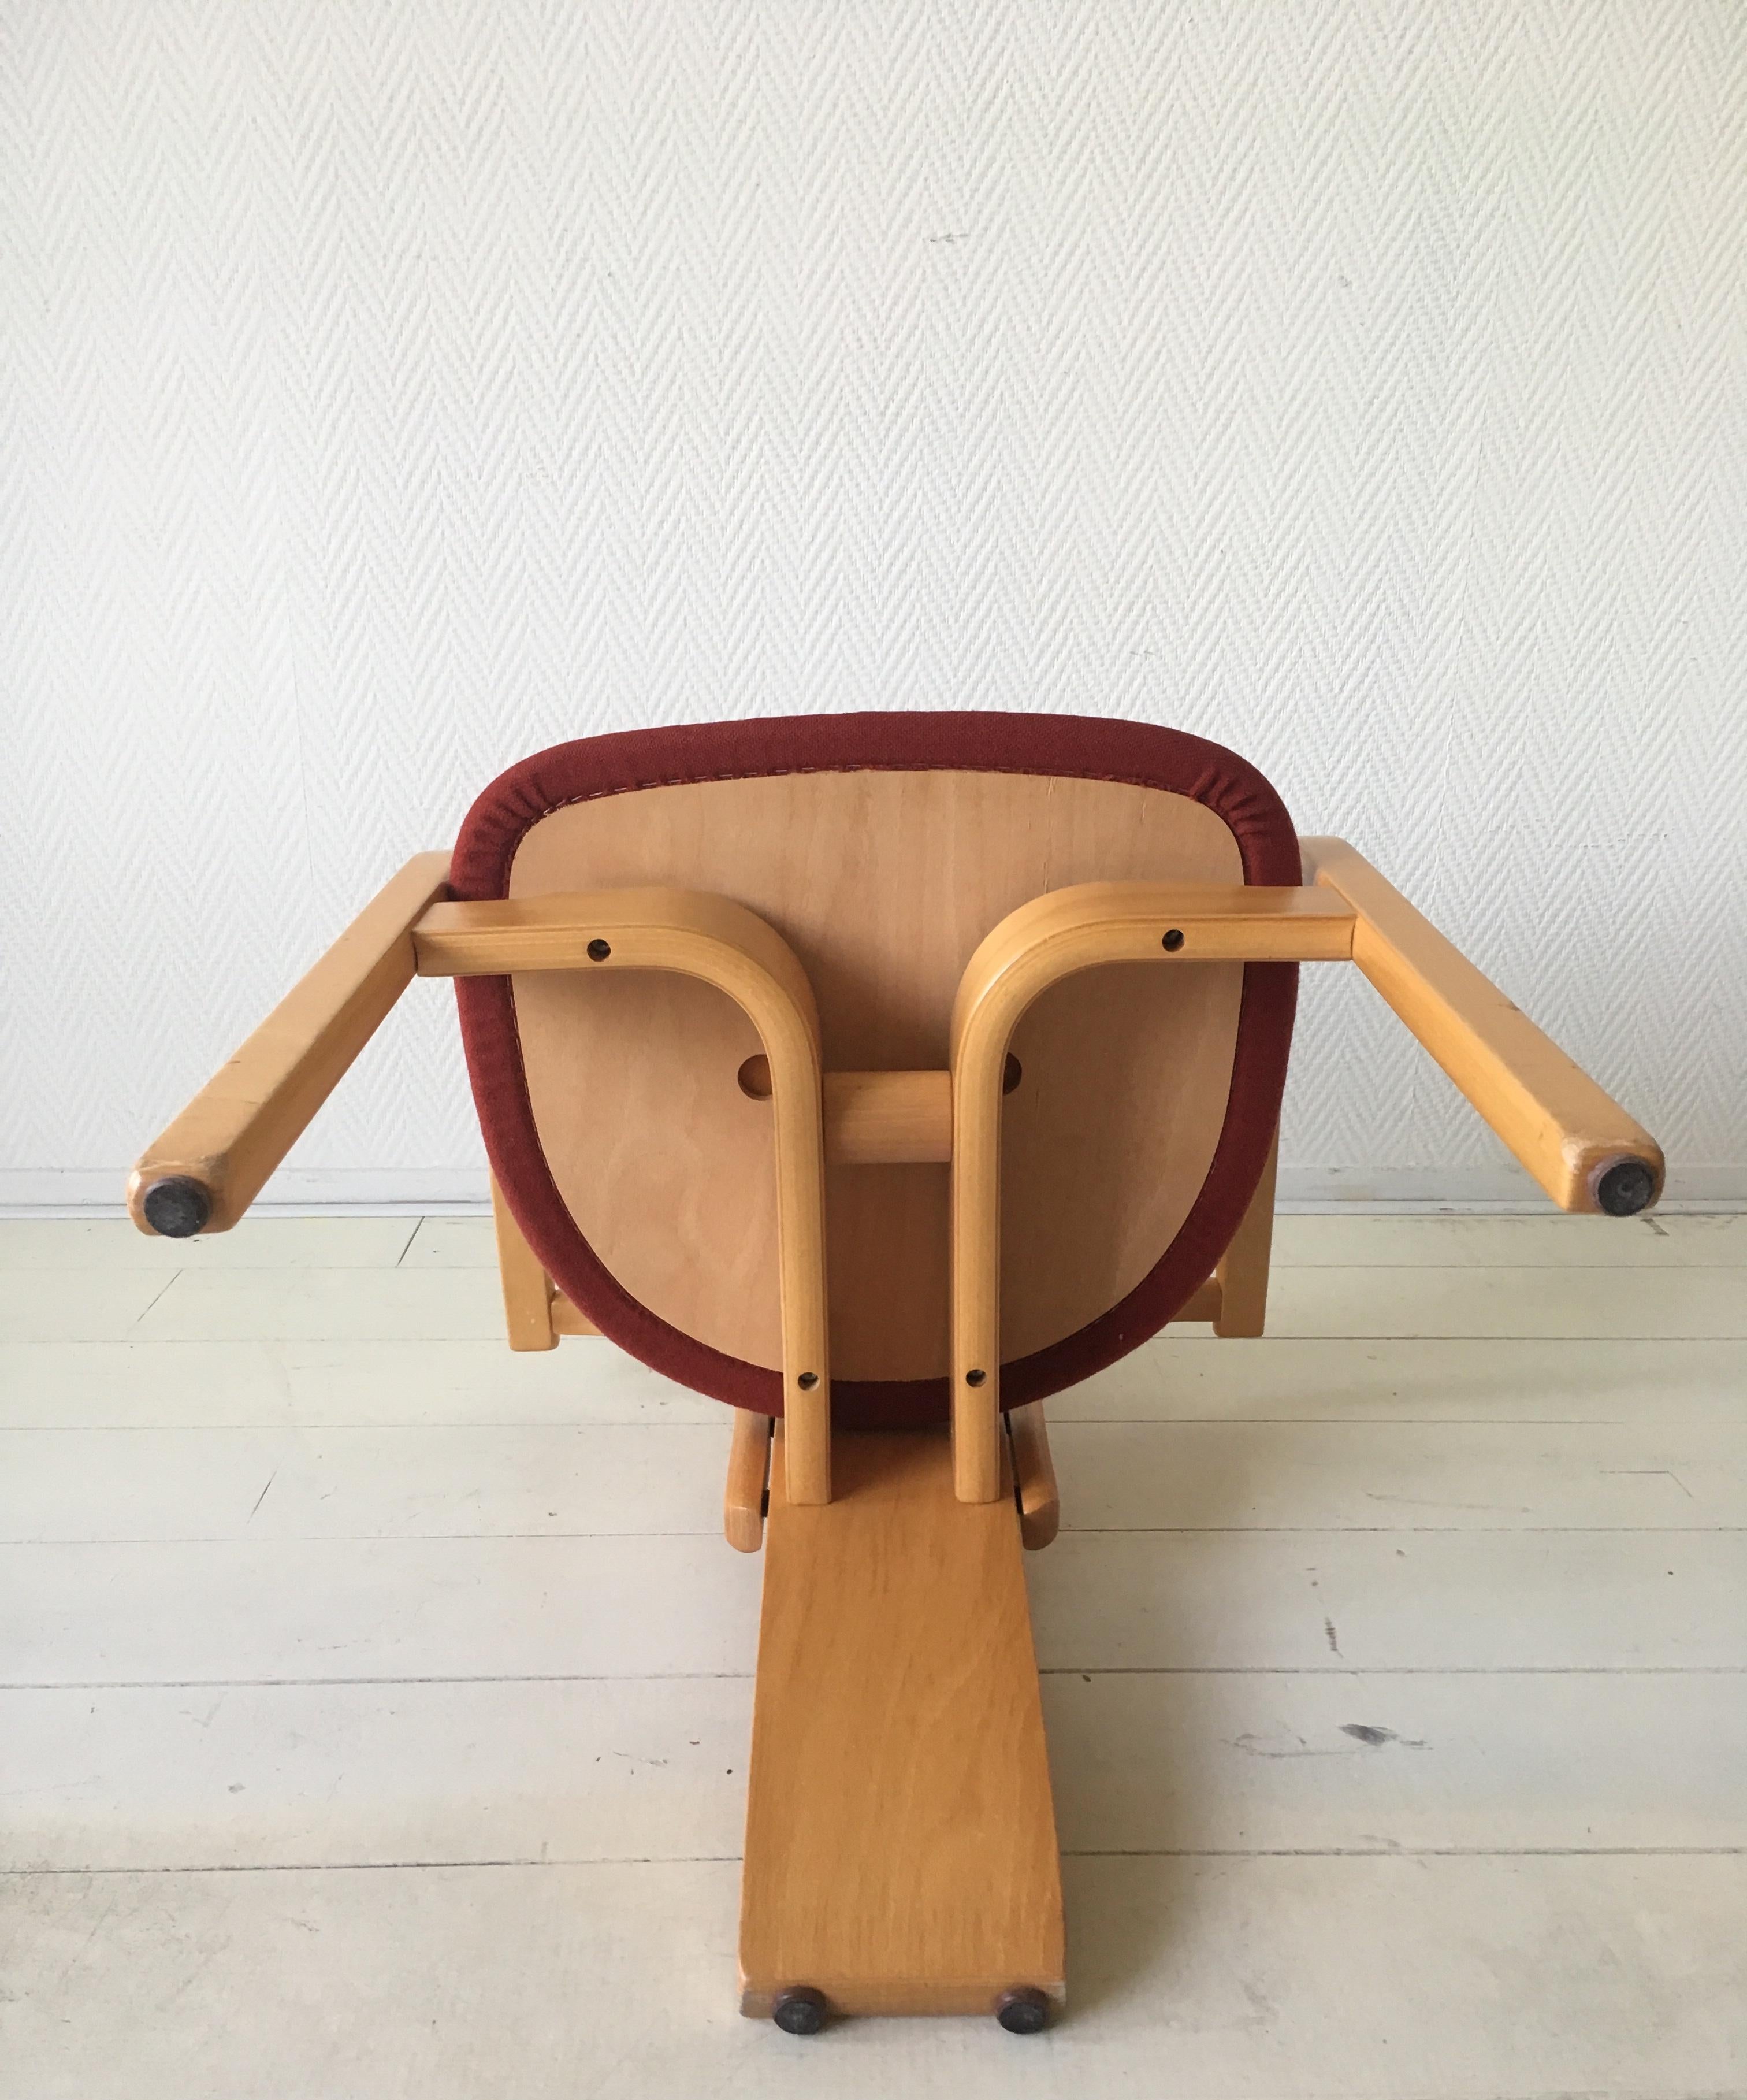 Extraordinary Memphis Style TOTEM Chairs by Torstein Nilsen for Westnofa, 1980s For Sale 2